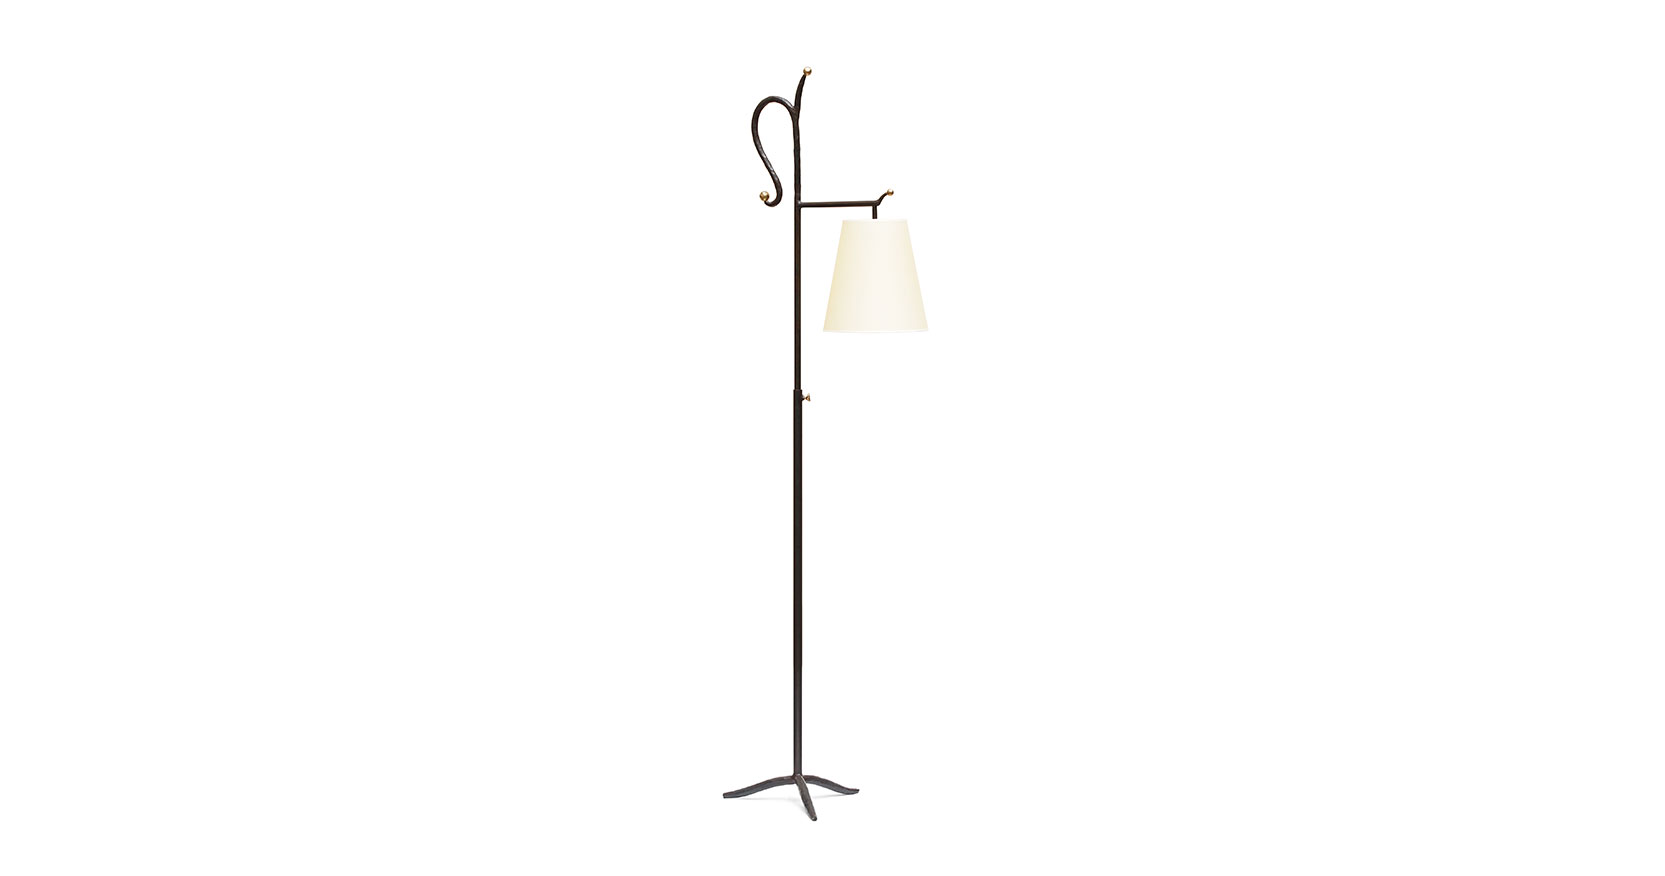 Garouste Bonetti, floor lamp in black wrought iron, 3 flattened curved legs, a straight stem that ends with a baroque curved shape, and a small horizontal rod from which a beige lampshade is suspended, and a small horizontal rod from which a beige lampshade is suspended